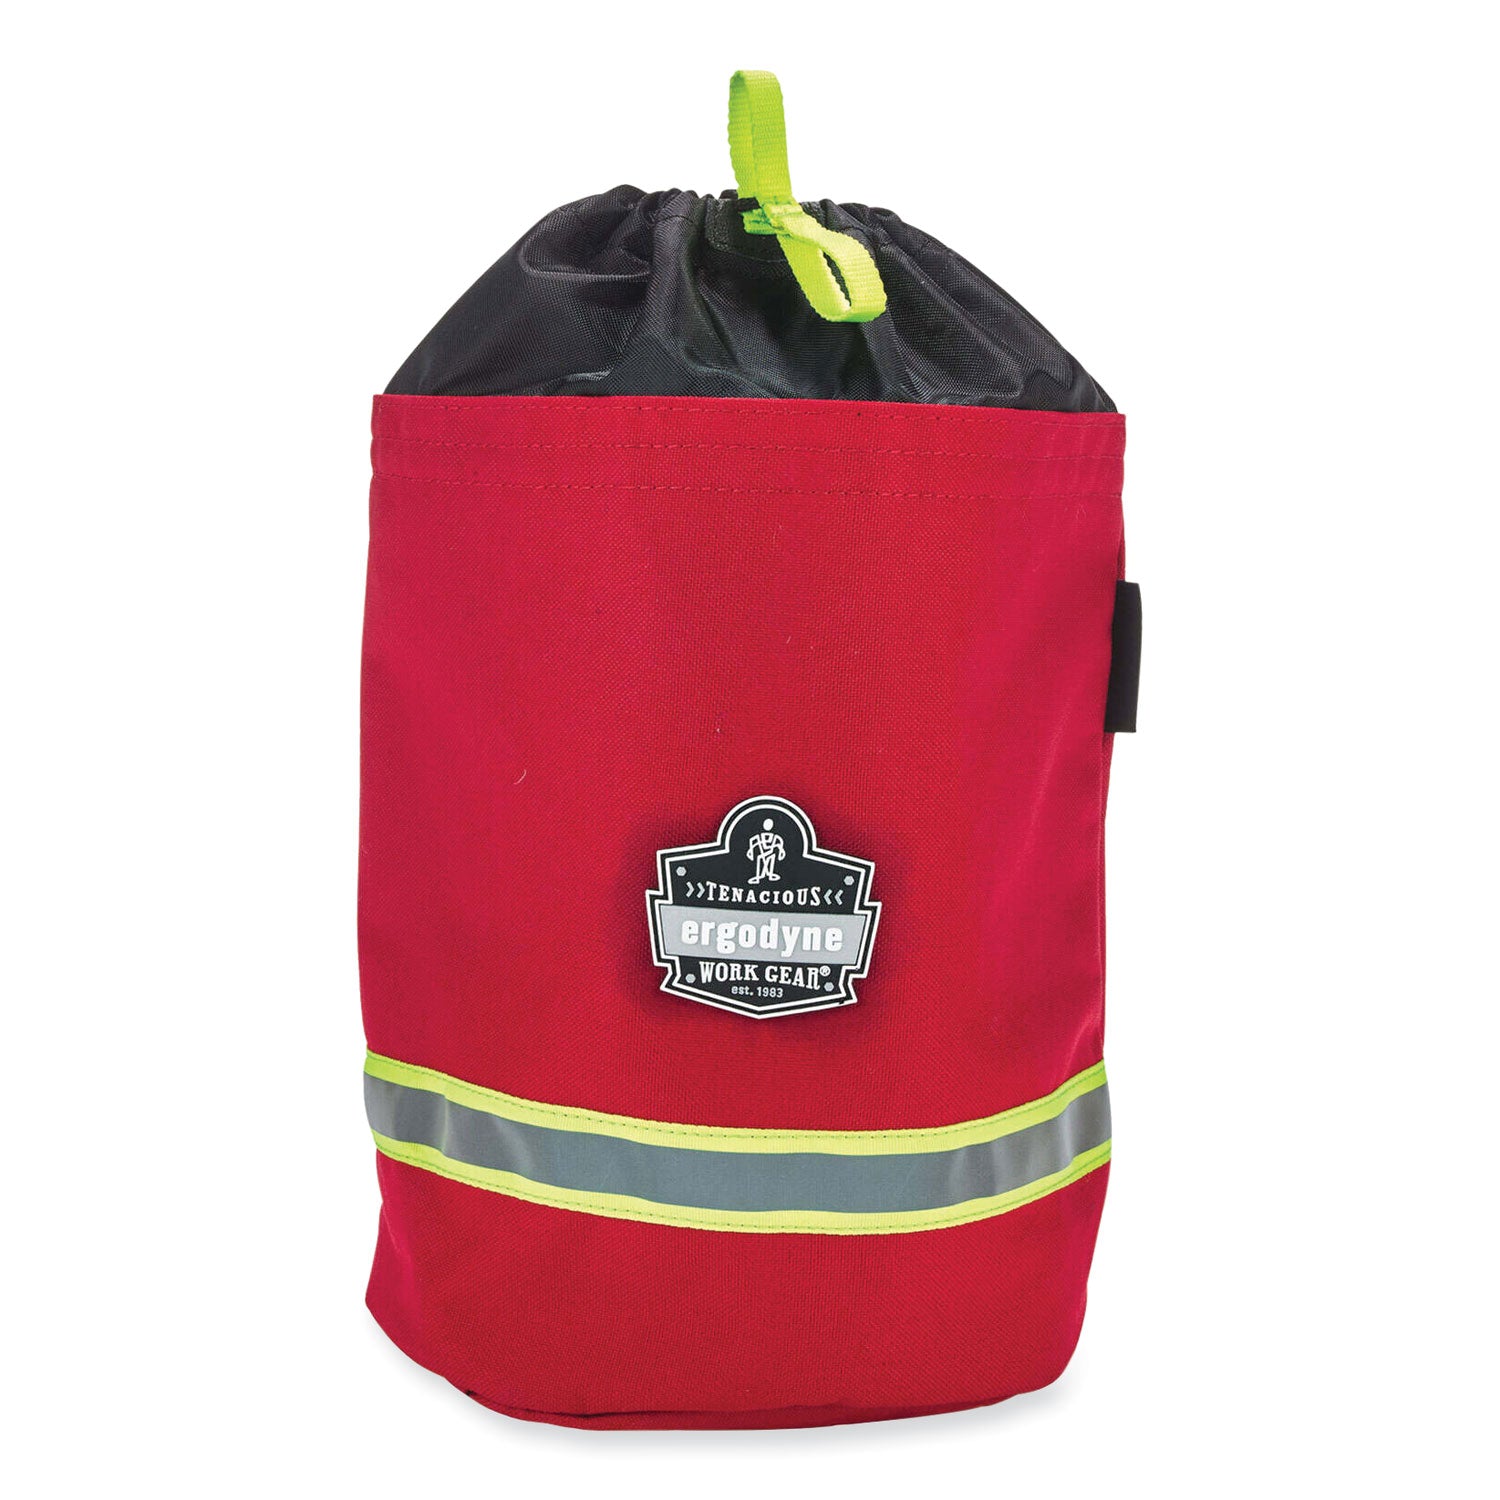 arsenal-5080-scba-mask-bag-85-x-85-x-14-red-ships-in-1-3-business-days_ego13080 - 1